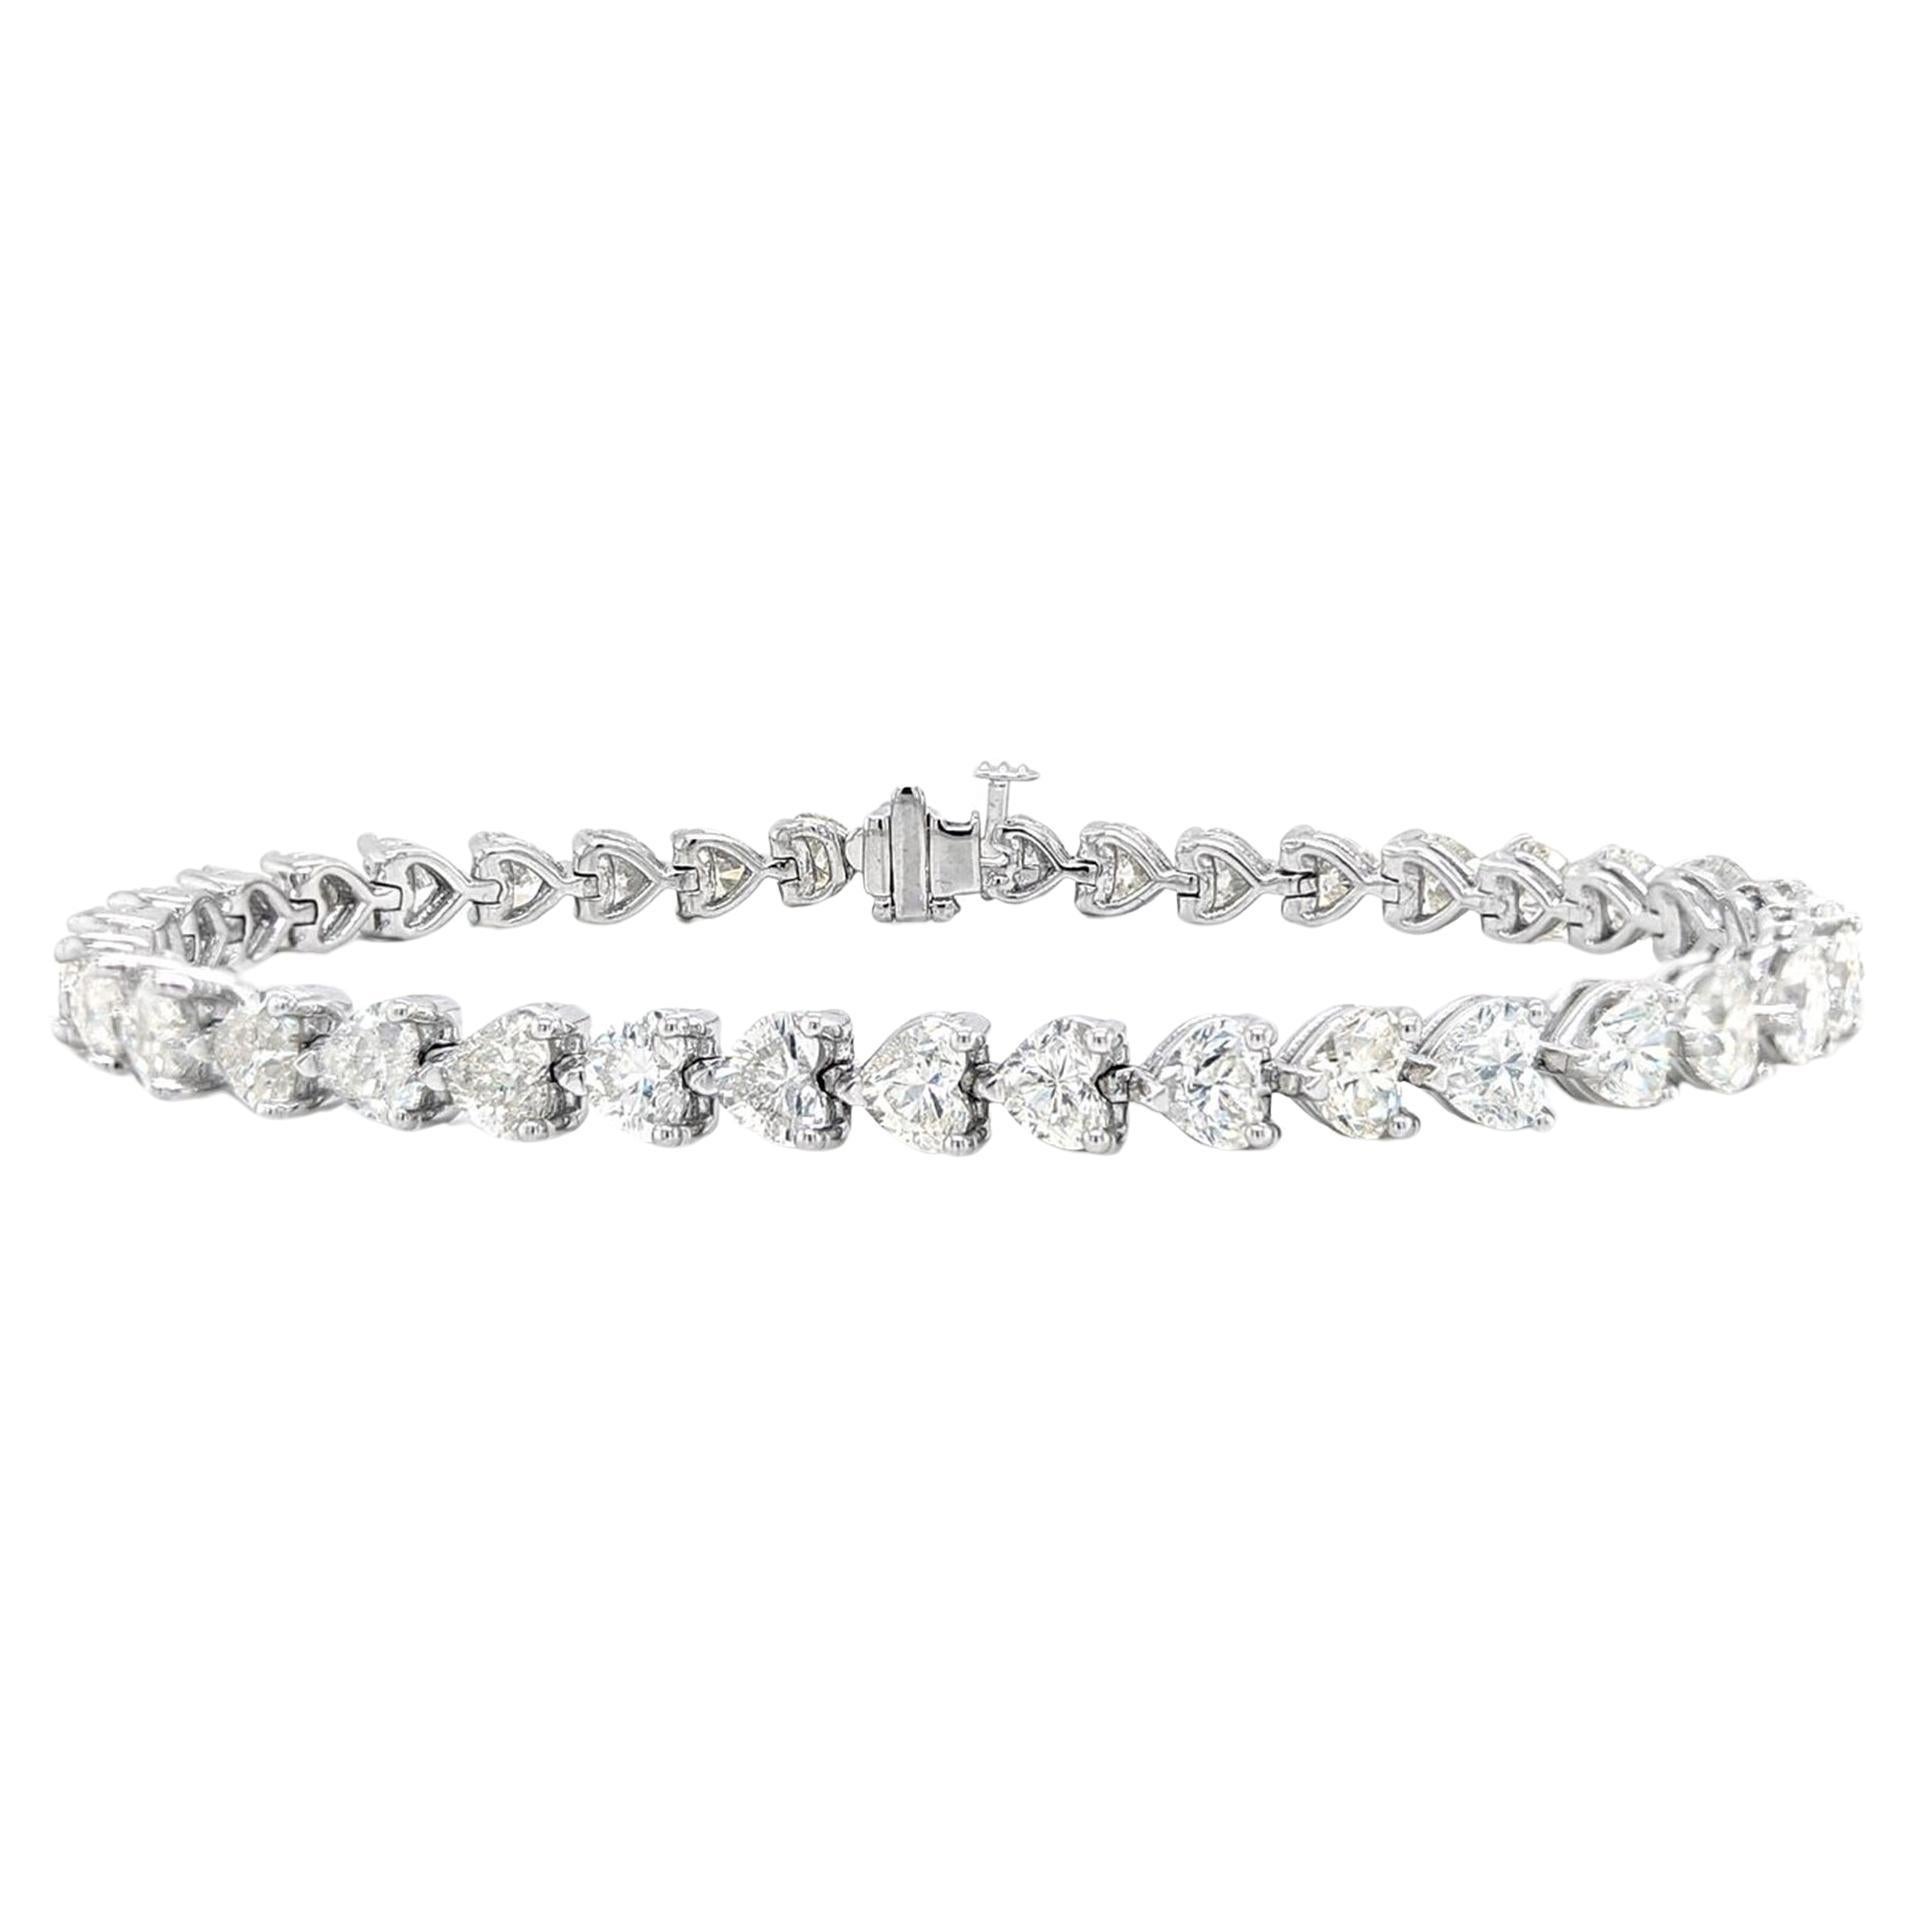 16 Carat 3 Prong Airline Diamond Tennis Bracelet in 14K White Gold!

Elevate your style with our exquisite Diamond Tennis Bracelet, a masterpiece featuring a unique 3 prong airline design. Adorned with 51 heart diamonds, totaling an impressive 16.12